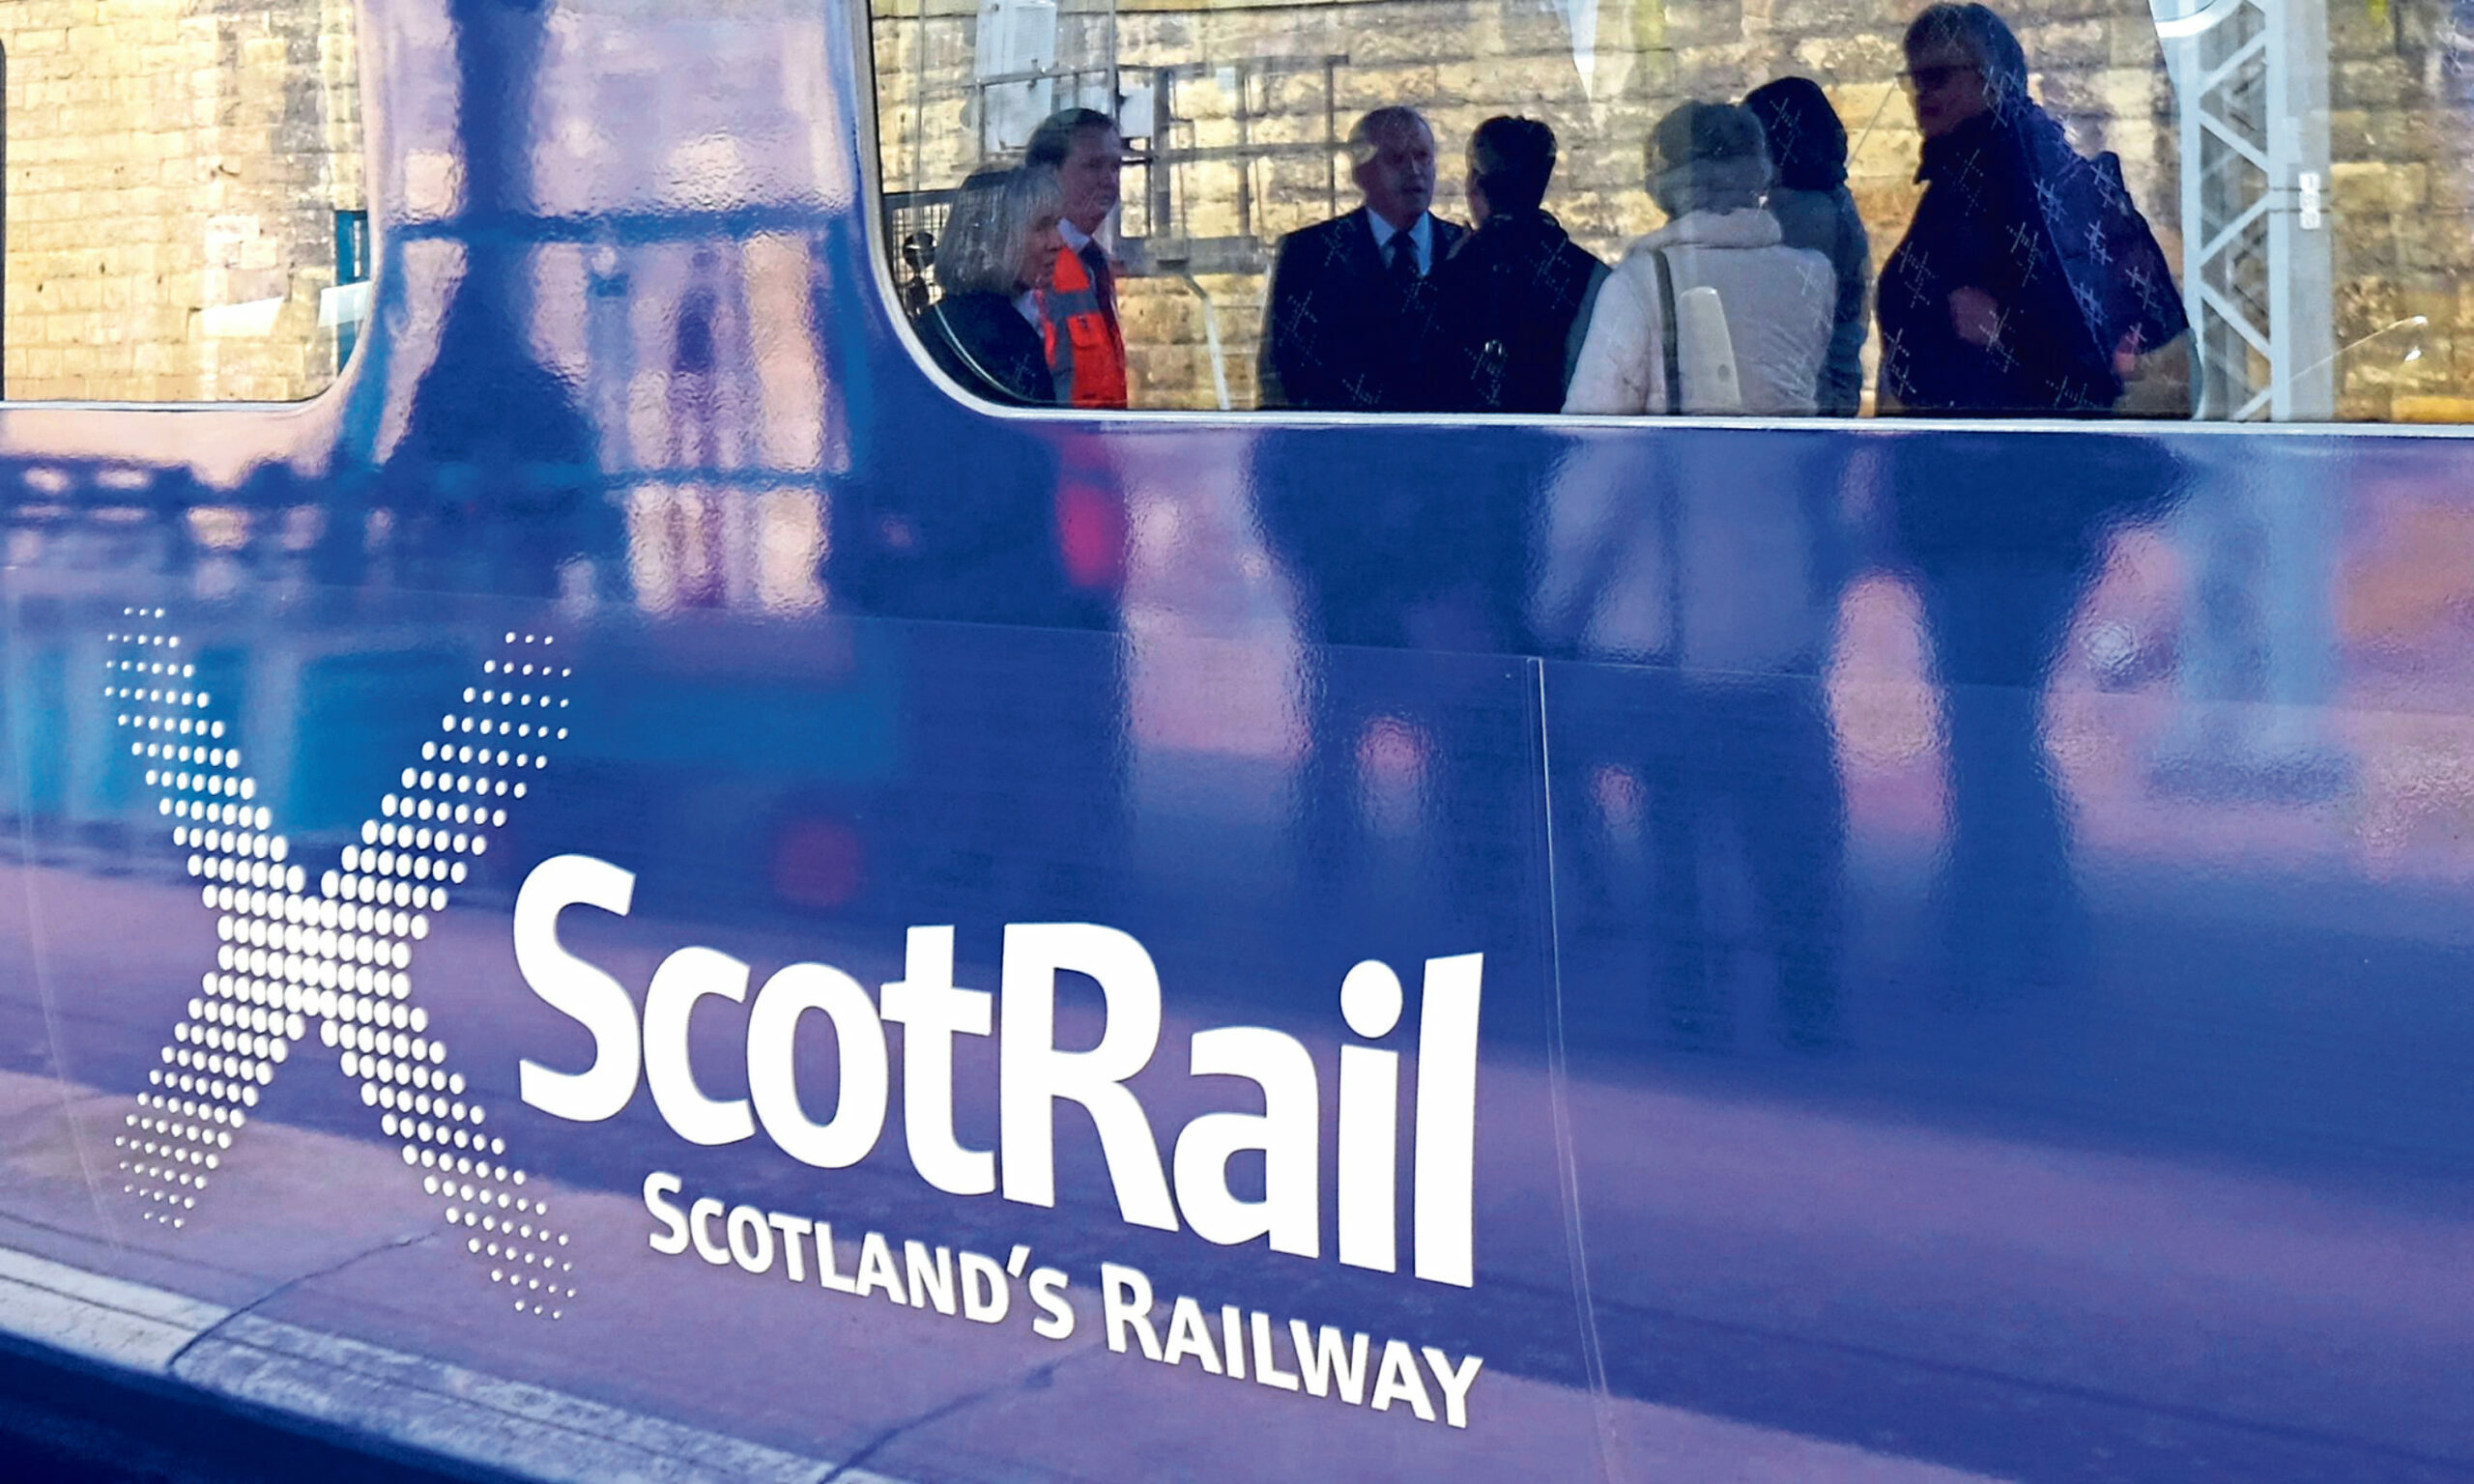 Photo of ScotRail train carriage